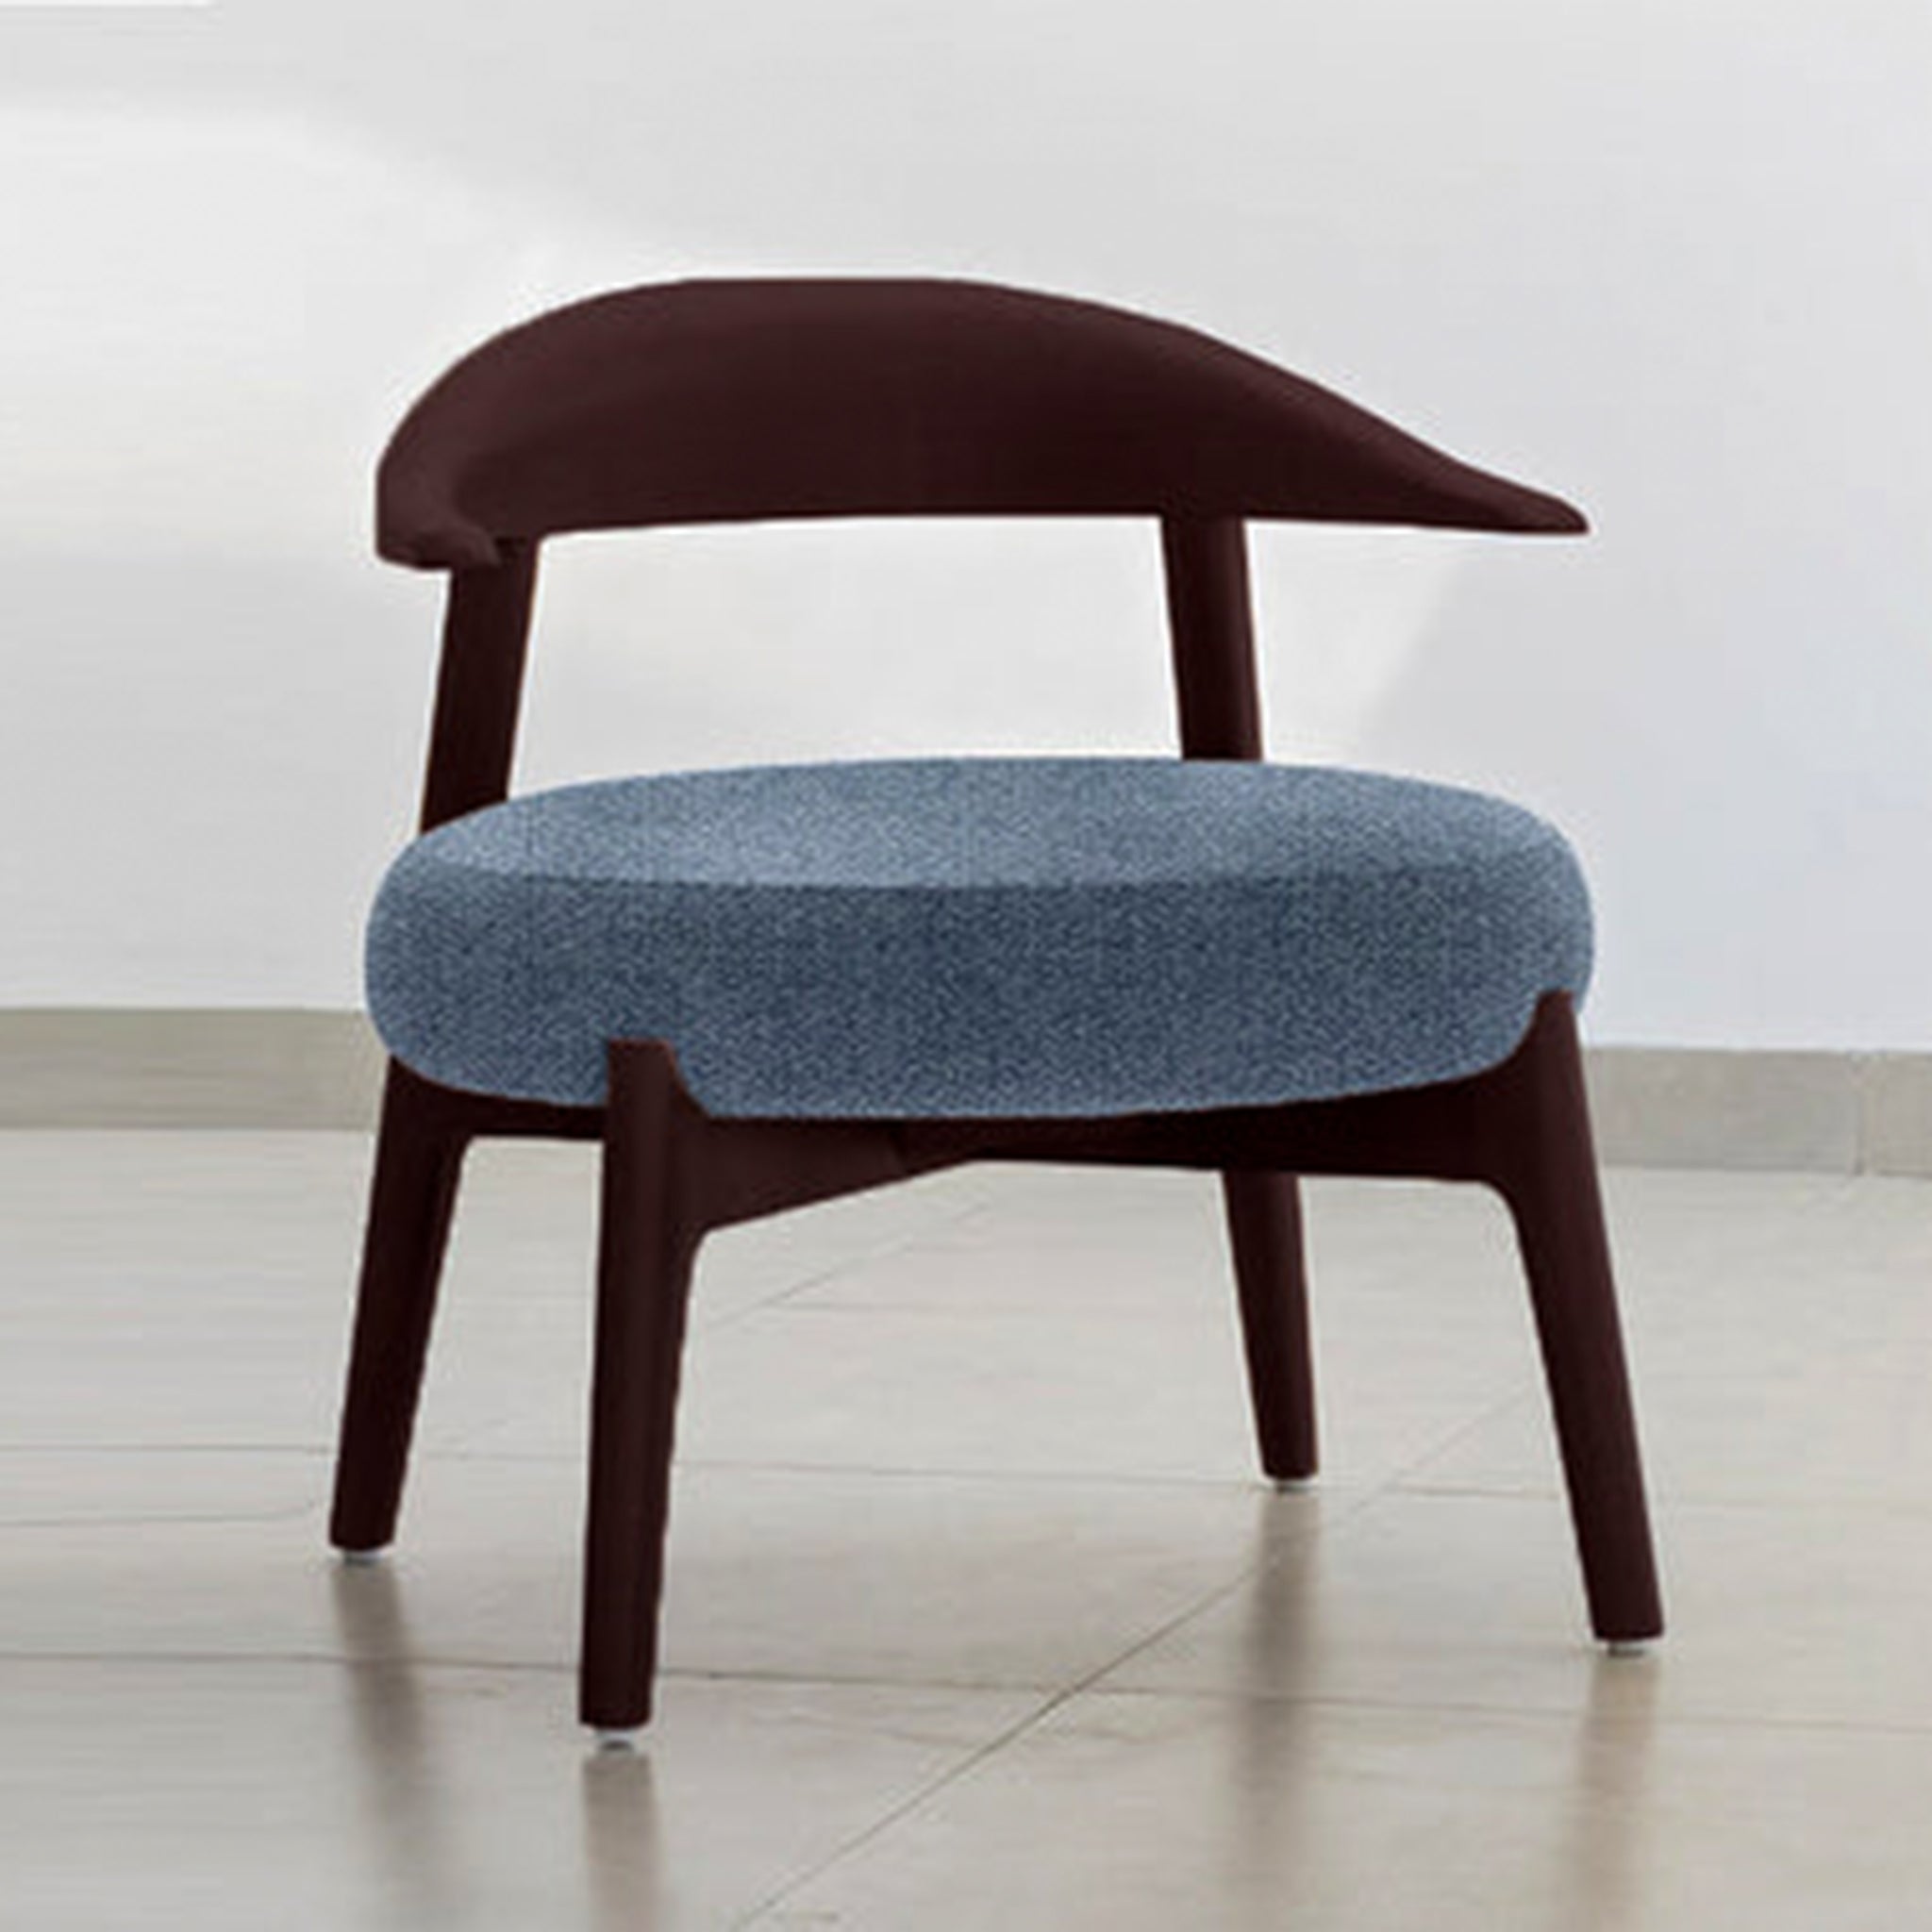 "The Hyde Accent Chair with sleek wooden backrest and plush blue seat"